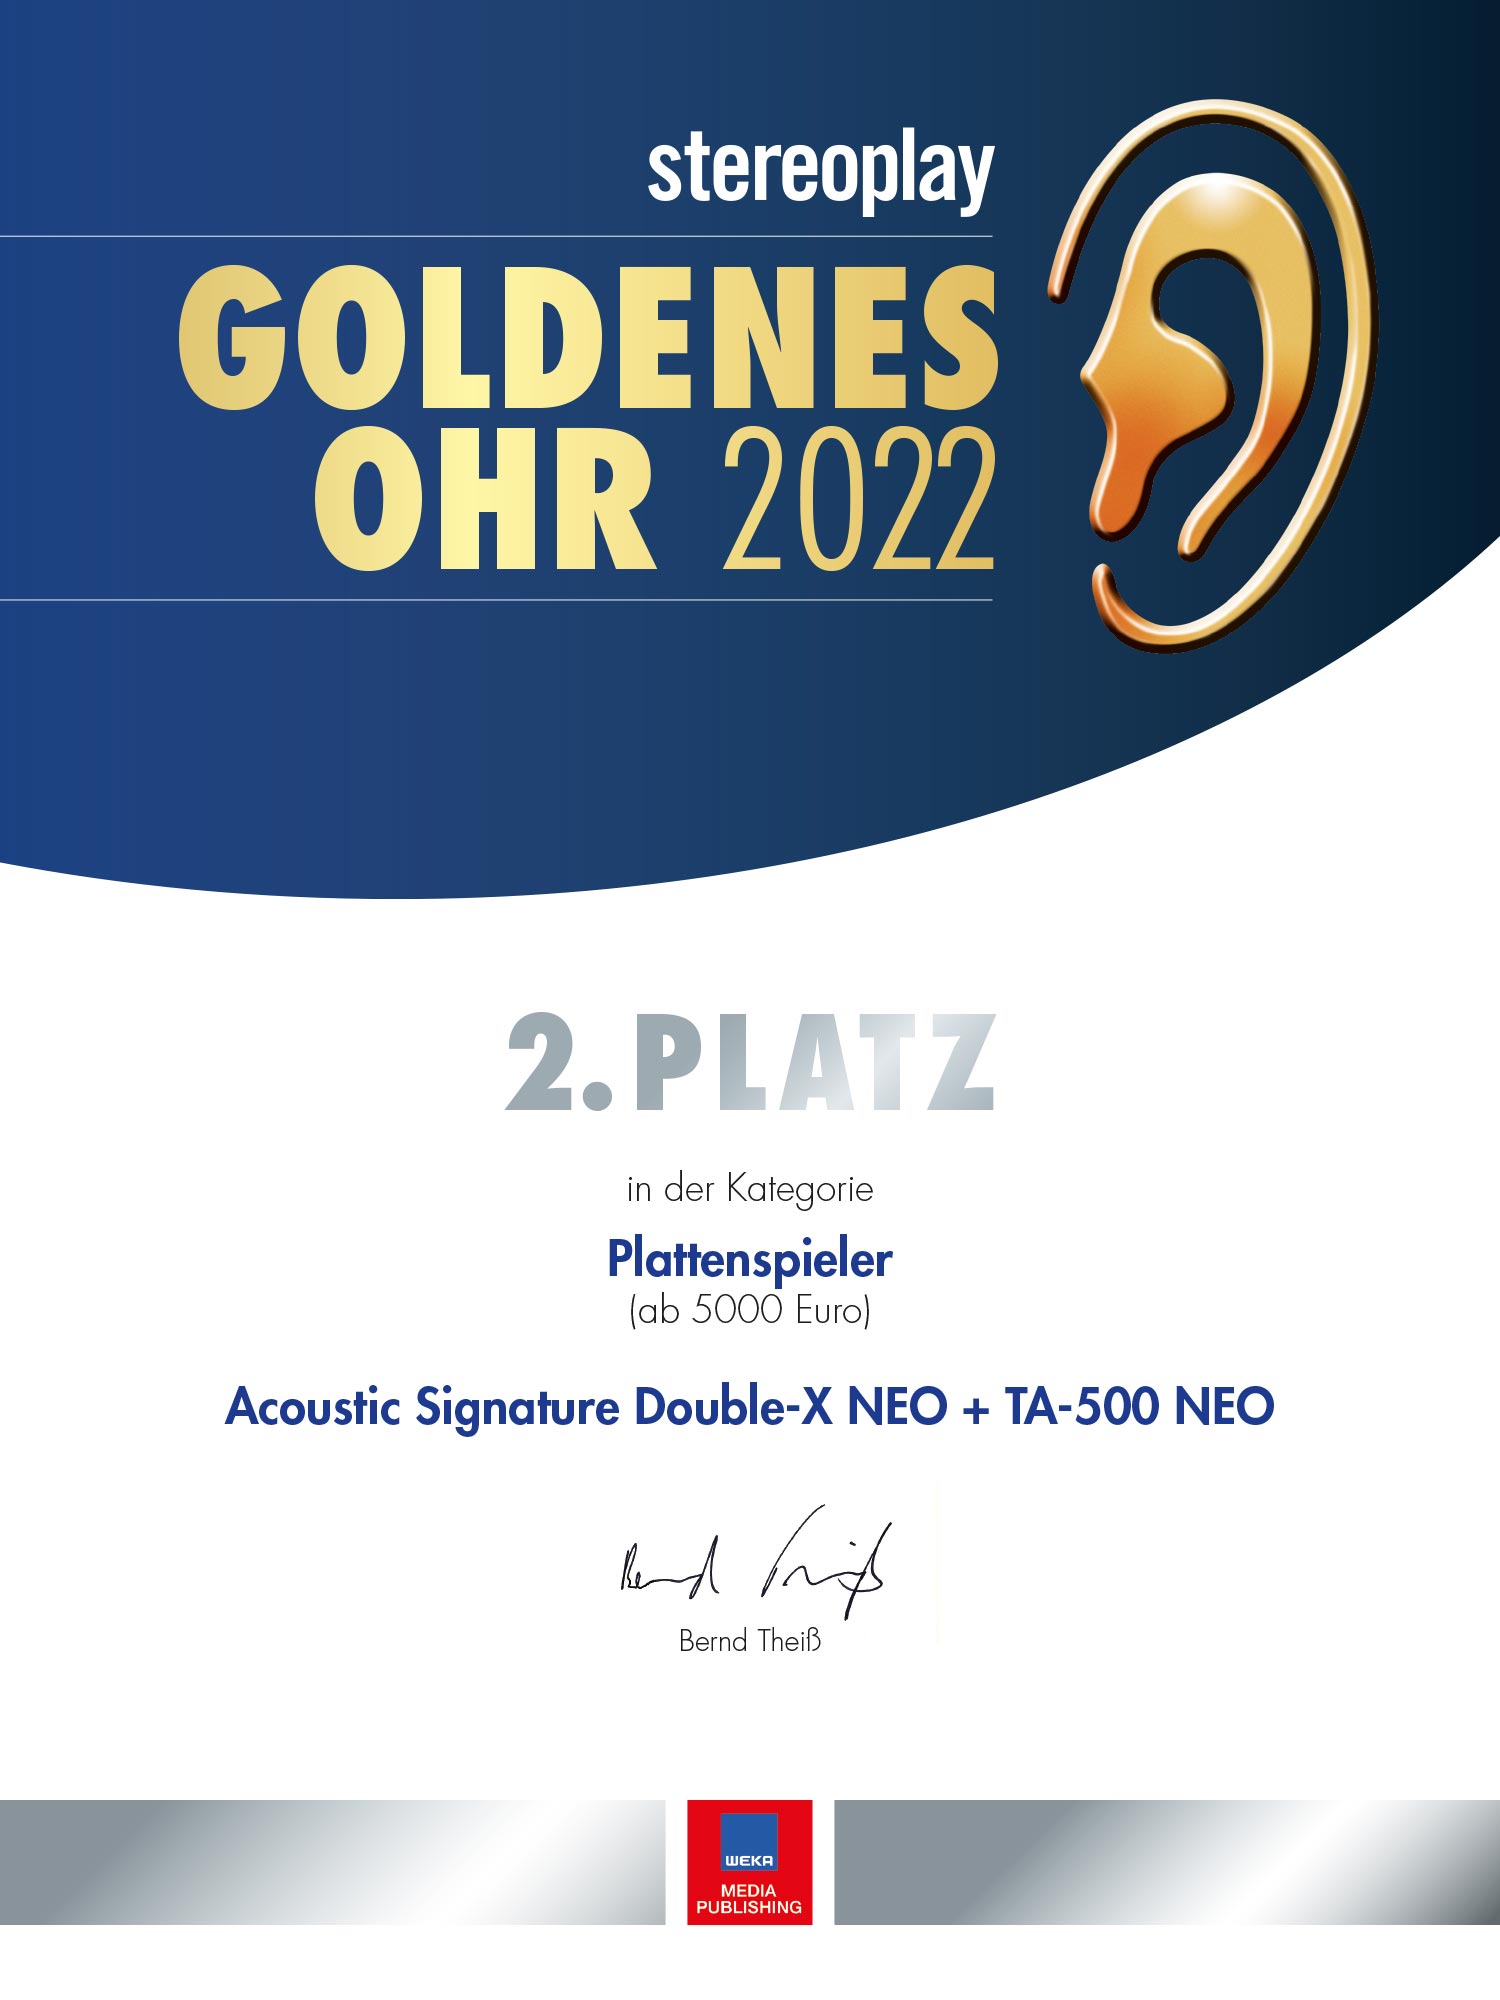 Stereoplay Goldenes Ohr 2022: Double X NEO